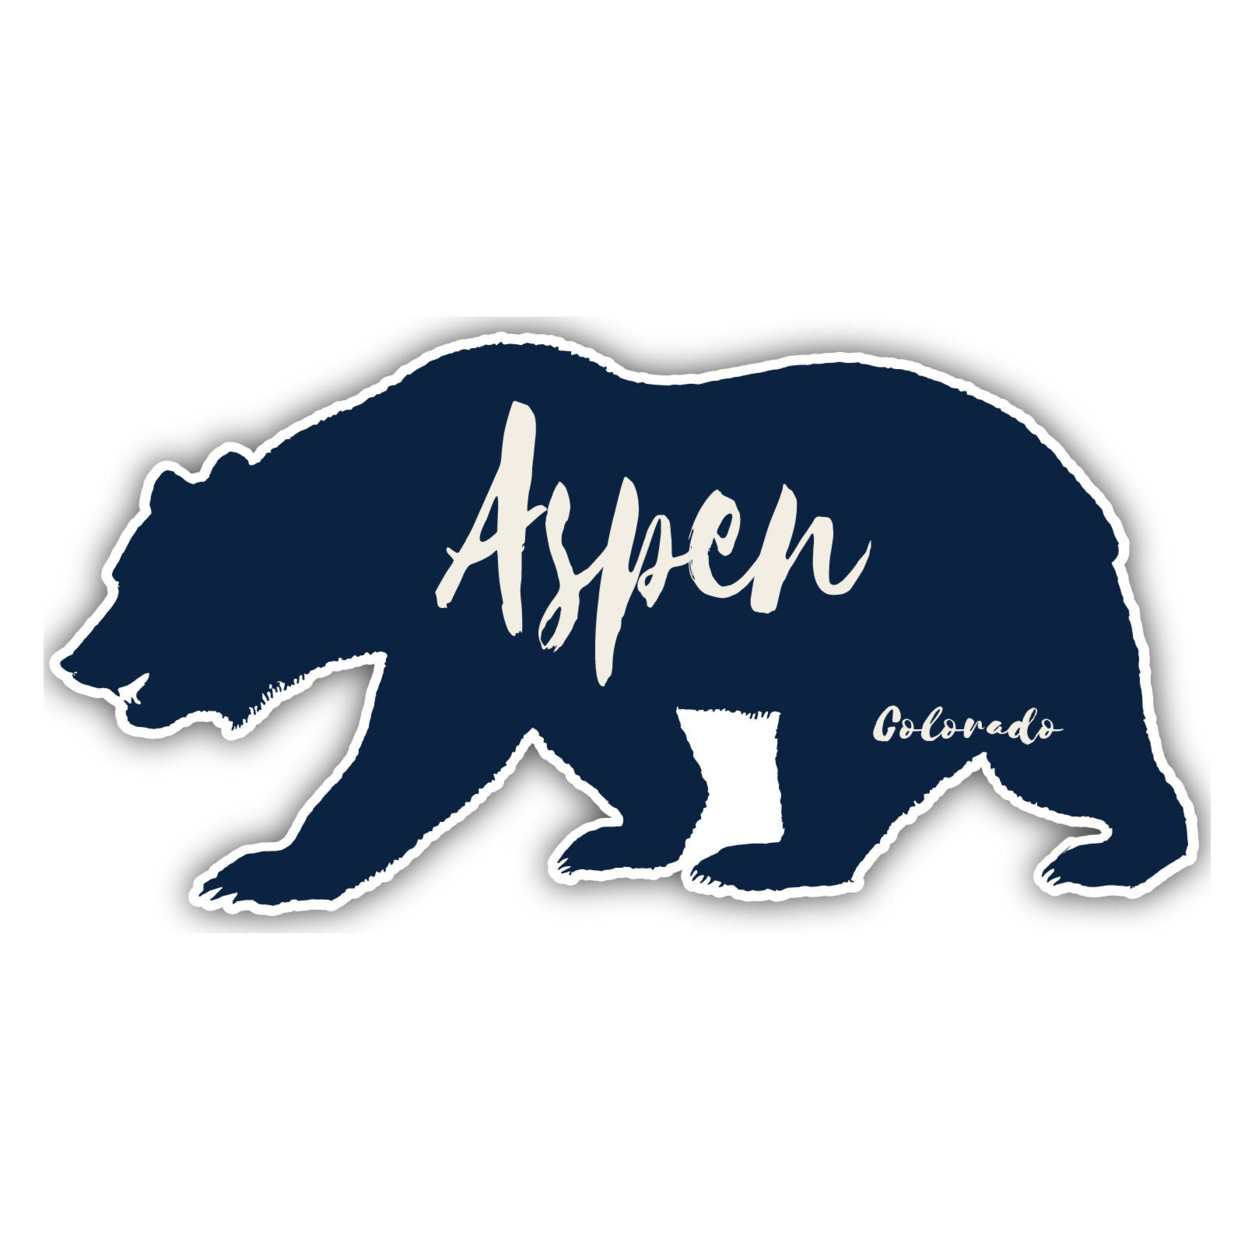 Aspen Colorado Souvenir Decorative Stickers (Choose Theme And Size) - 4-Pack, 10-Inch, Great Outdoors